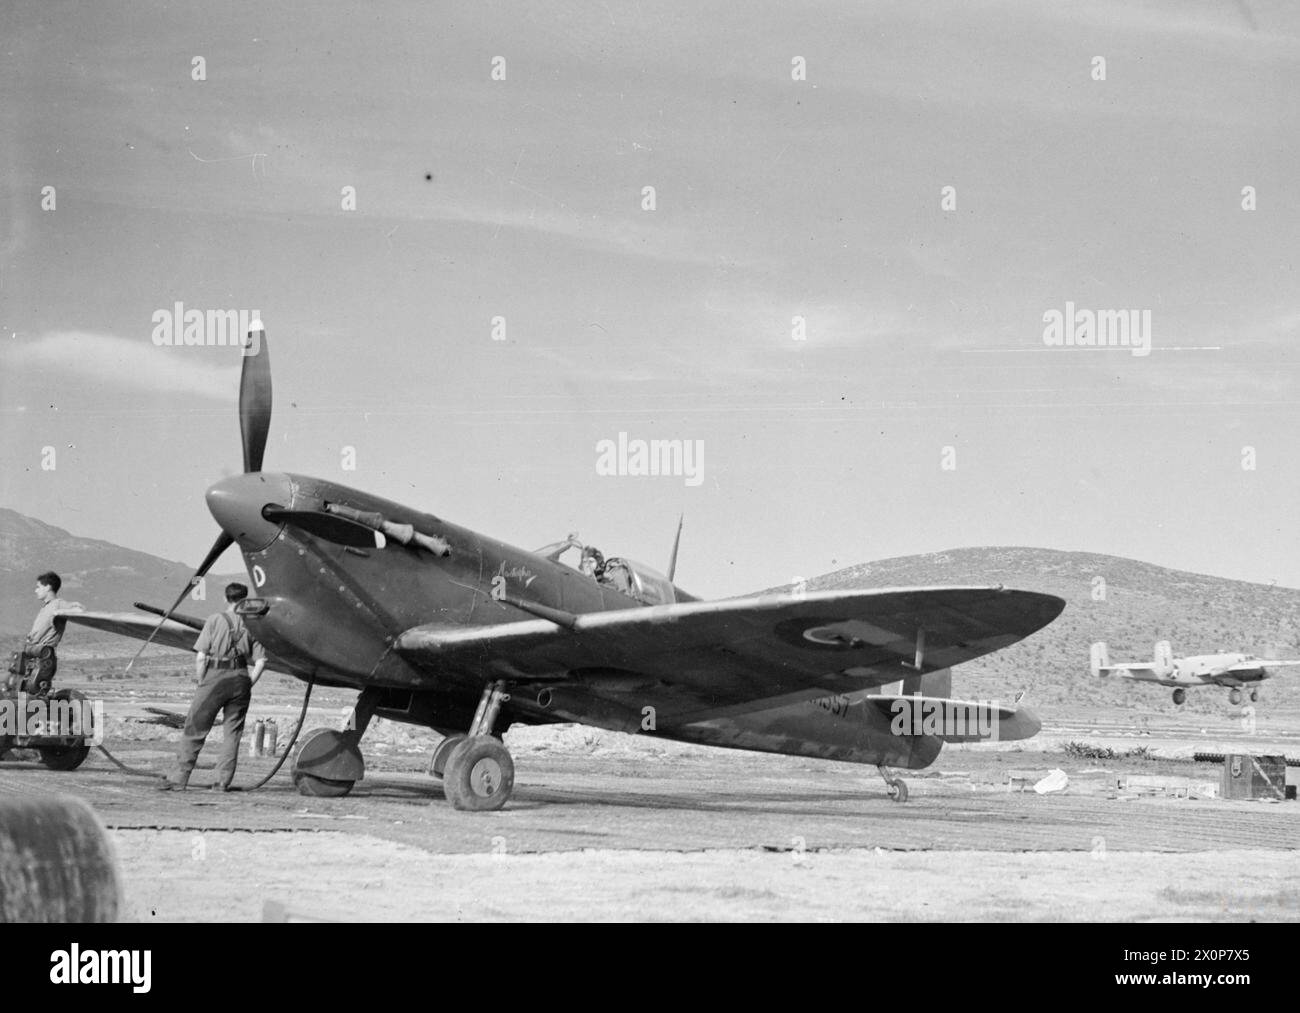 ROYAL AIR FORCE OPERATIONS IN THE MIDDLE EAST AND NORTH AFRICA, 1939-1943. - Supermarine Spitfire Mark VC, ER557 'EF-D' 'Mustapha', of No. 232 Squadron RAF awaits the signal to start up in its dispersal at Tingley, Algeria. It formed part of the fighter escort for a force of North American B-25s of the 12th Bombardment Group Detachment USAAF, one of which can be seen taking off at right Royal Air Force, Maintenance Unit, 233, United States Army Air Force, 12th Bombardment Group Stock Photo